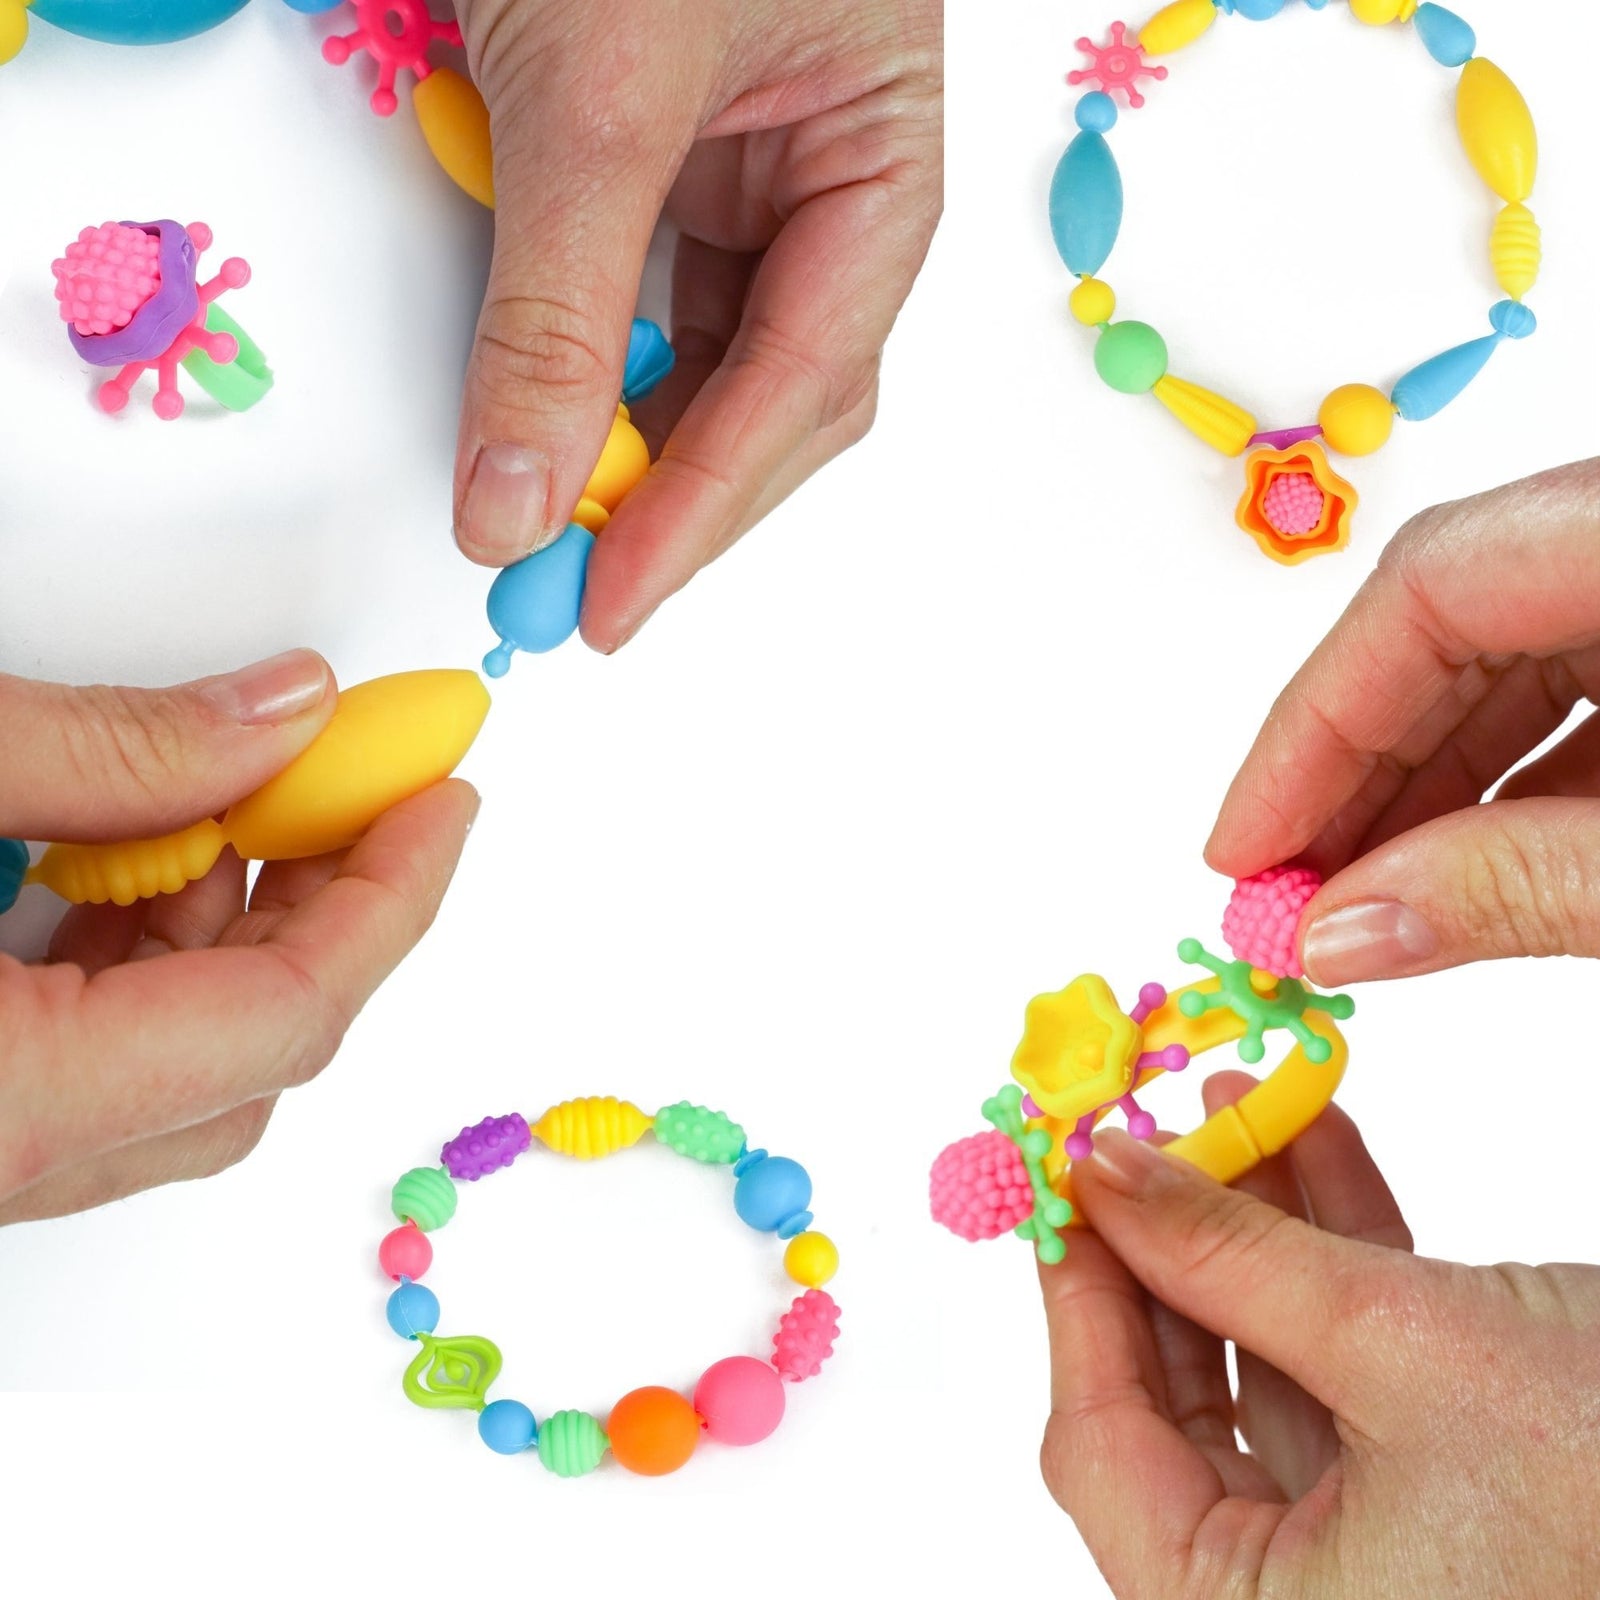  Atoymut Pop Beads, Snap Beads for Kids Crafts DIY Jewelry  Making Kit to Bracelets Necklace Hairband and Rings Toy for Age 3 4 5 6 7 8  Year Old Girls Toys : Toys & Games